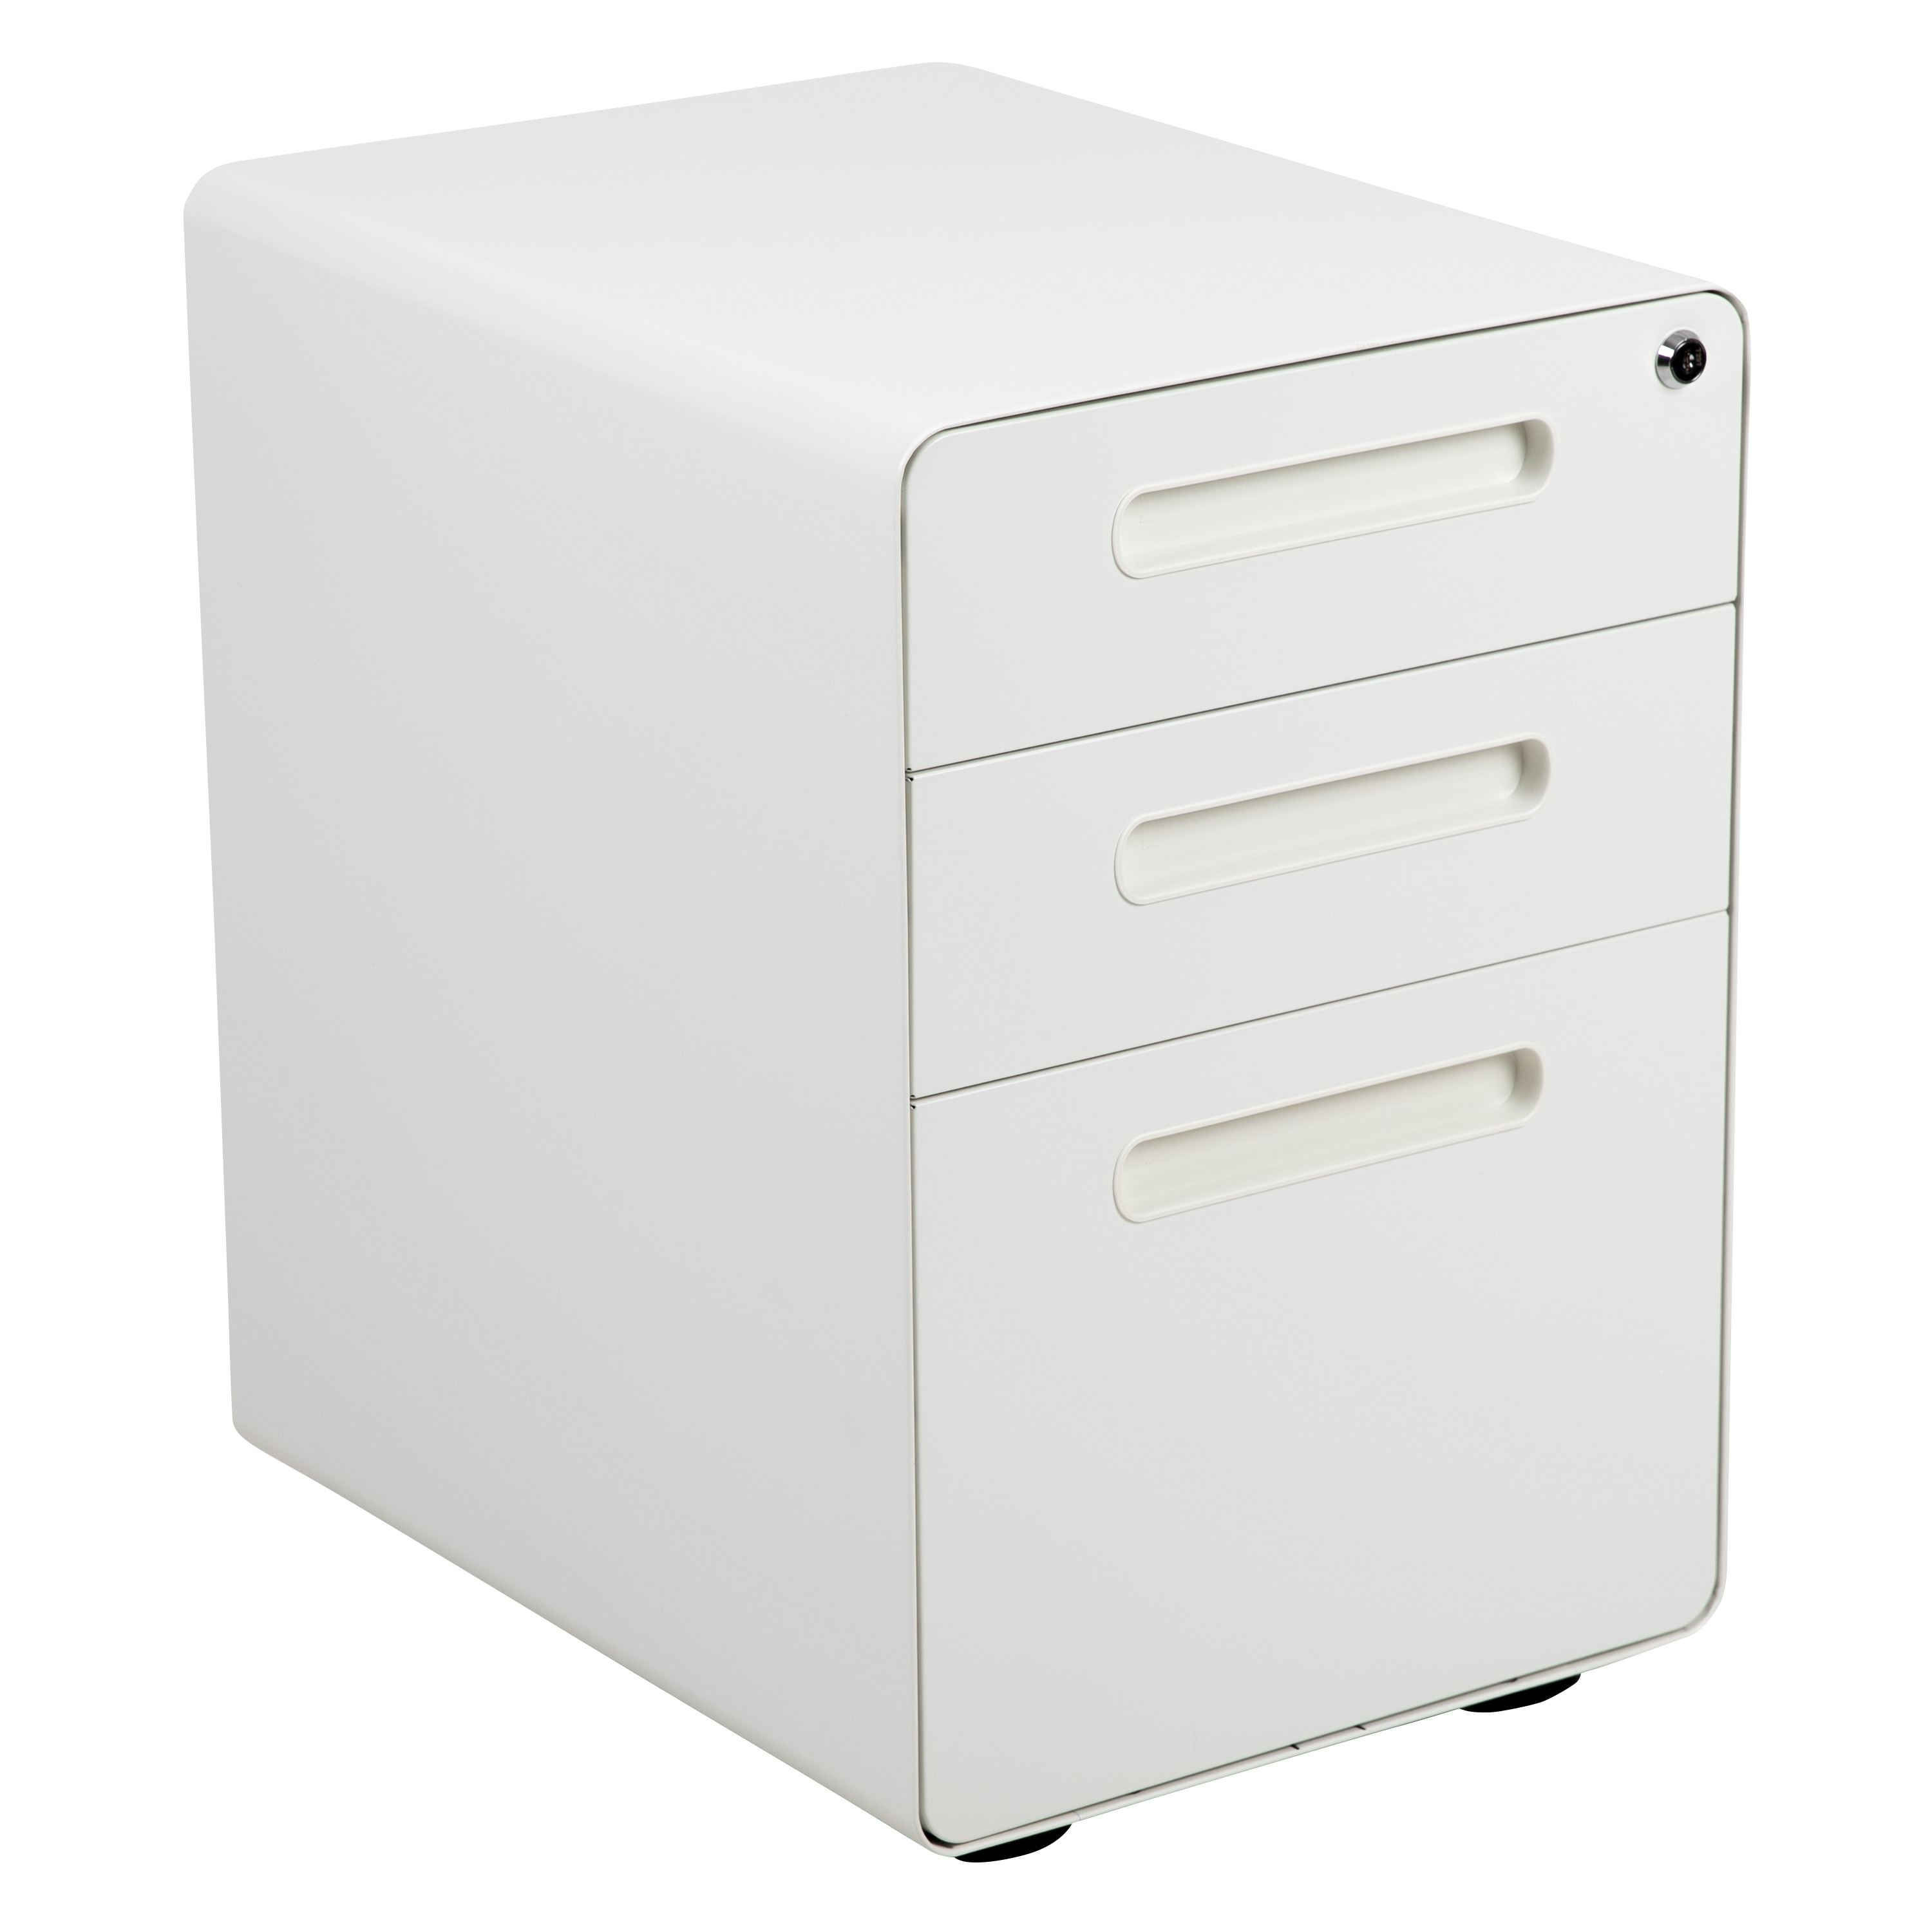 Modern Filing Cabinet Portable Office Desk Storage Drawers Tray Lockable White 